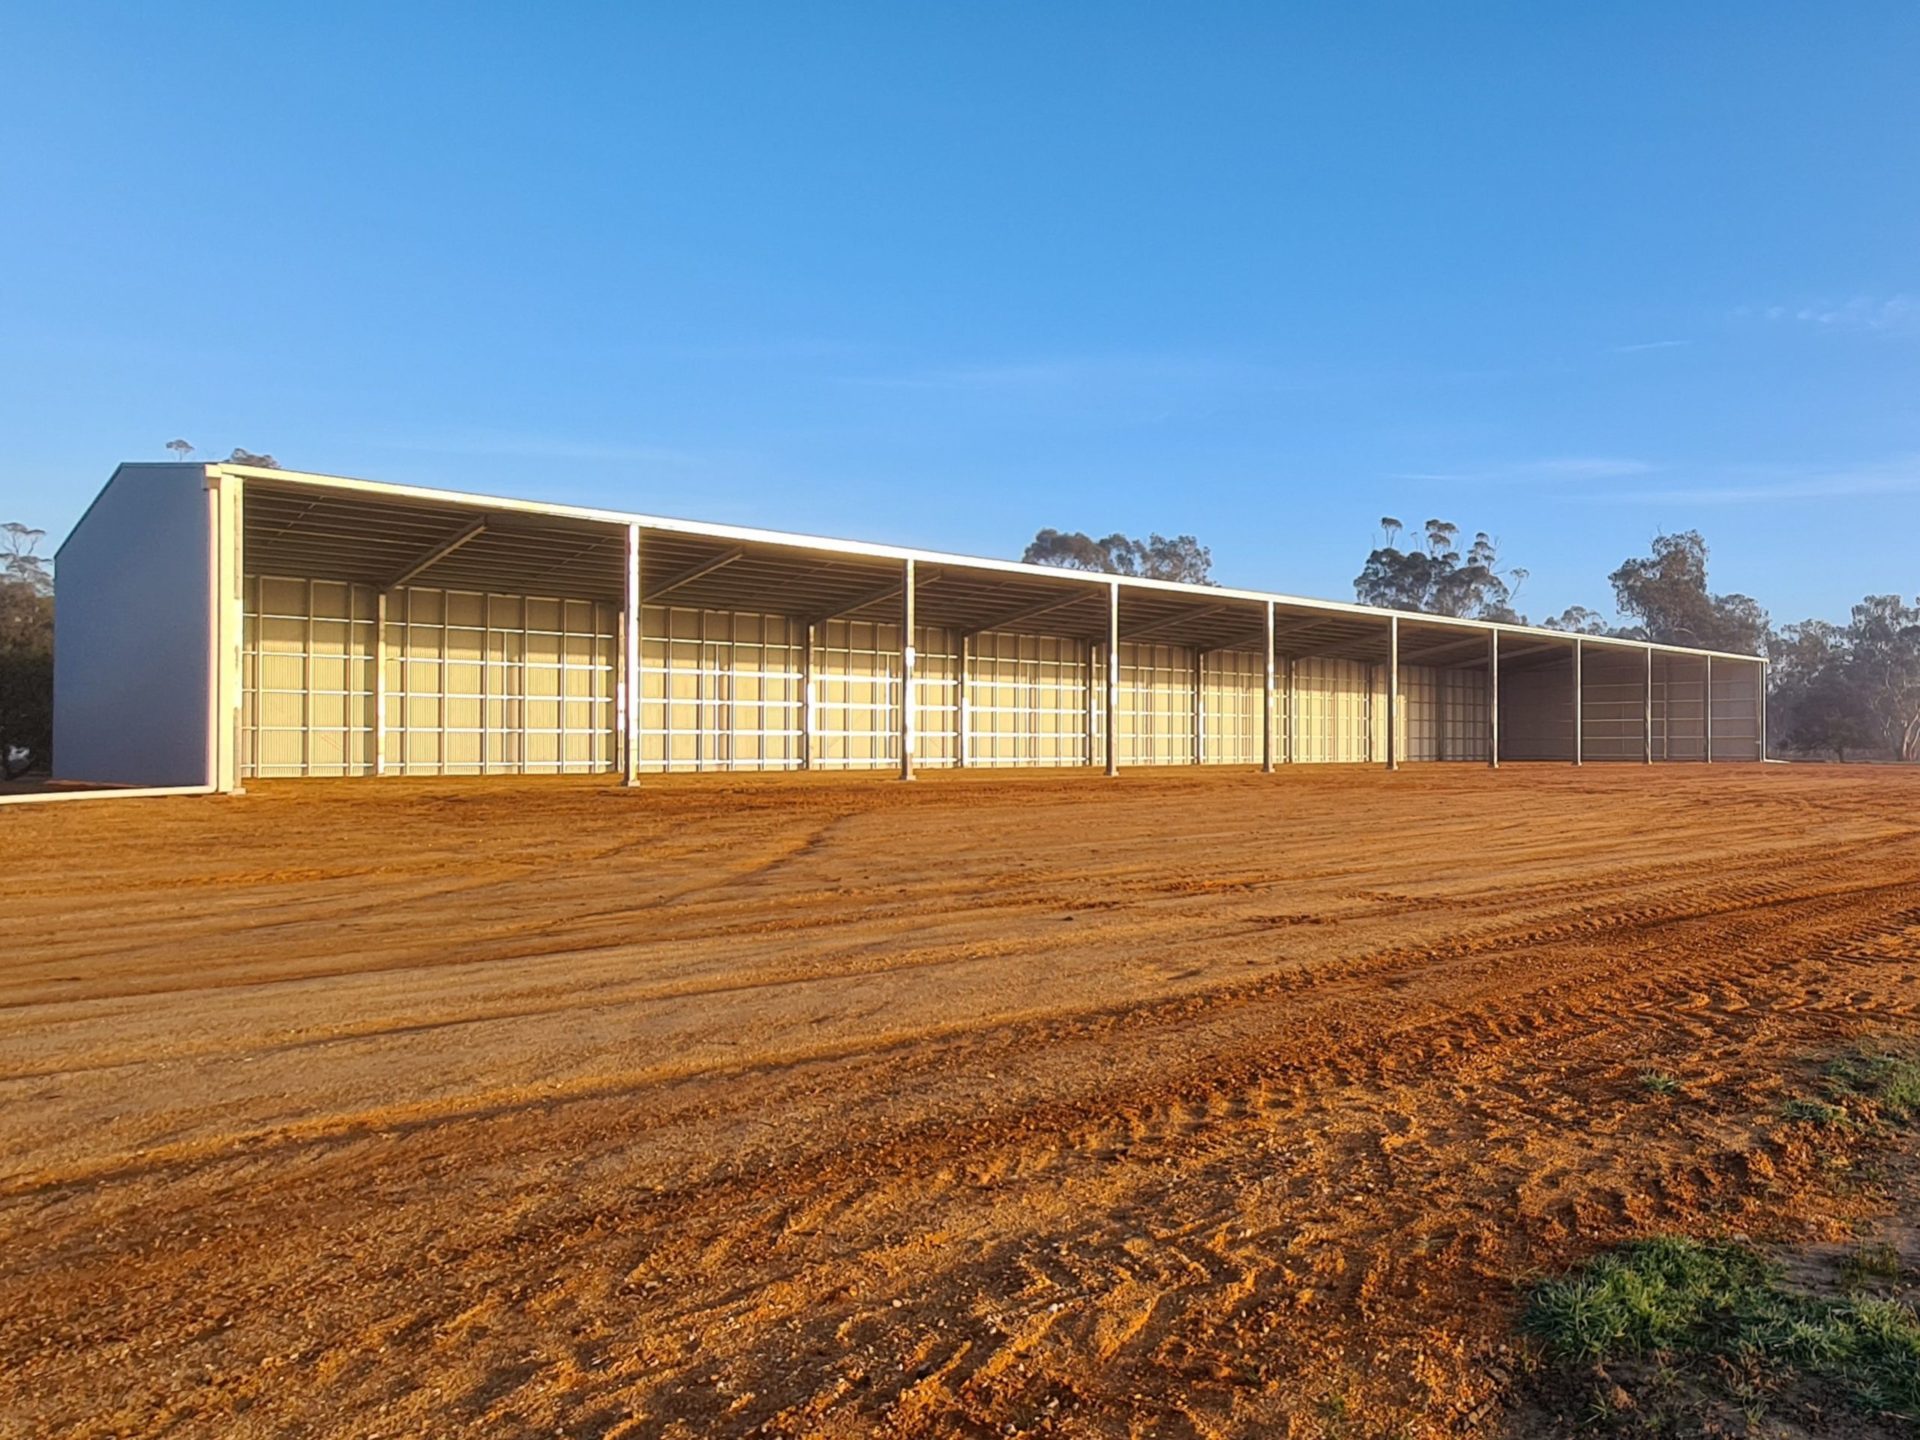 You are currently viewing 82.5m x 24m x 7.5m open-front hay shed